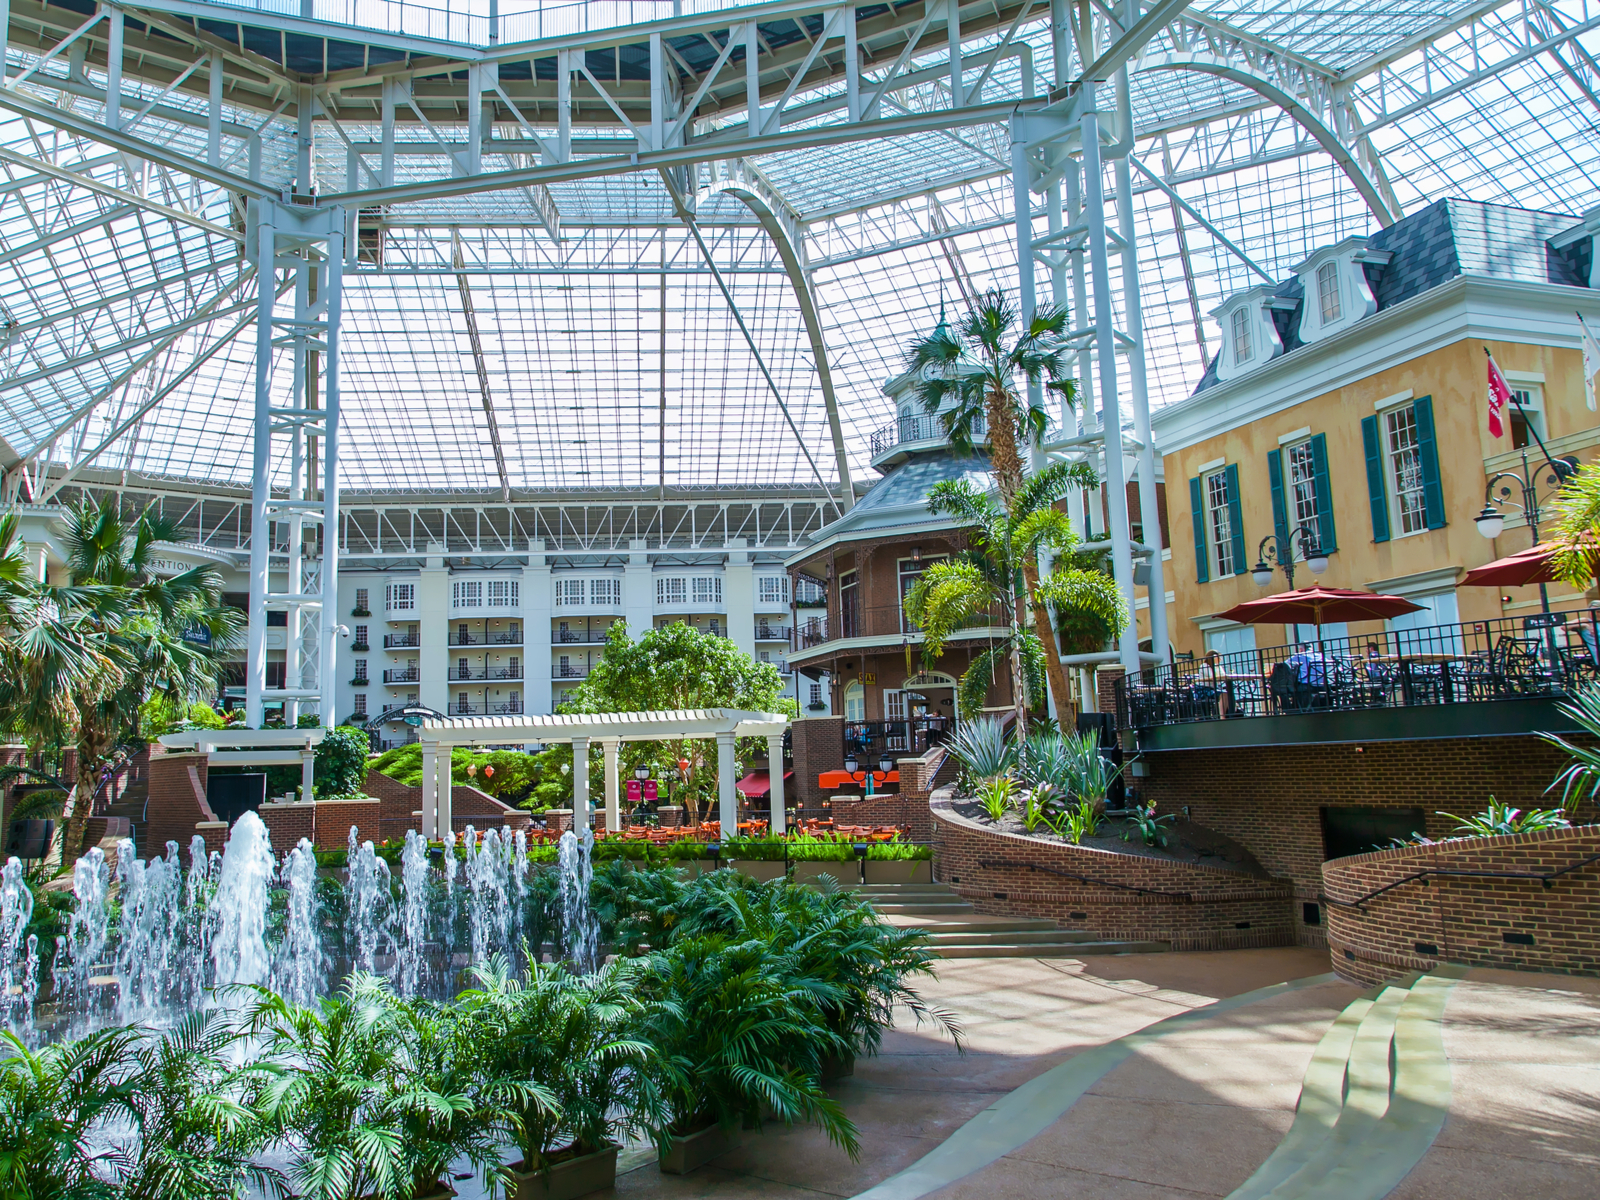 Interior of the gaylord opryland, one of the best things to do in Nashville